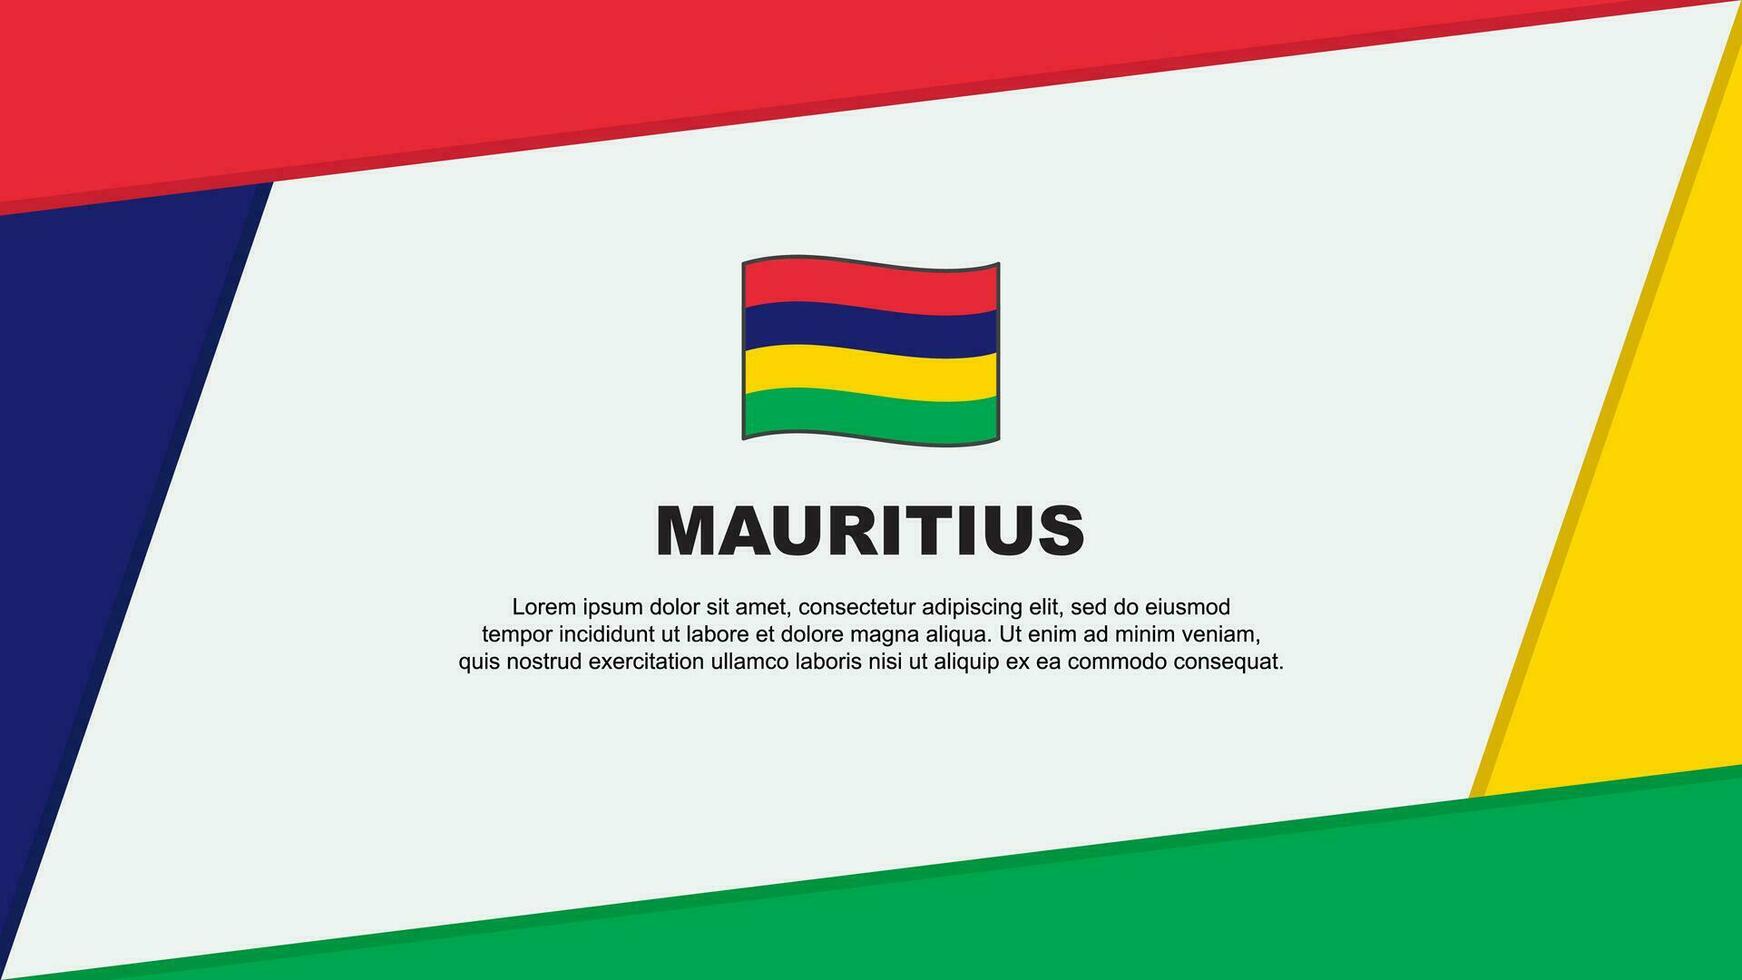 Mauritius Flag Abstract Background Design Template. Mauritius Independence Day Banner Cartoon Vector Illustration. Mauritius Banner